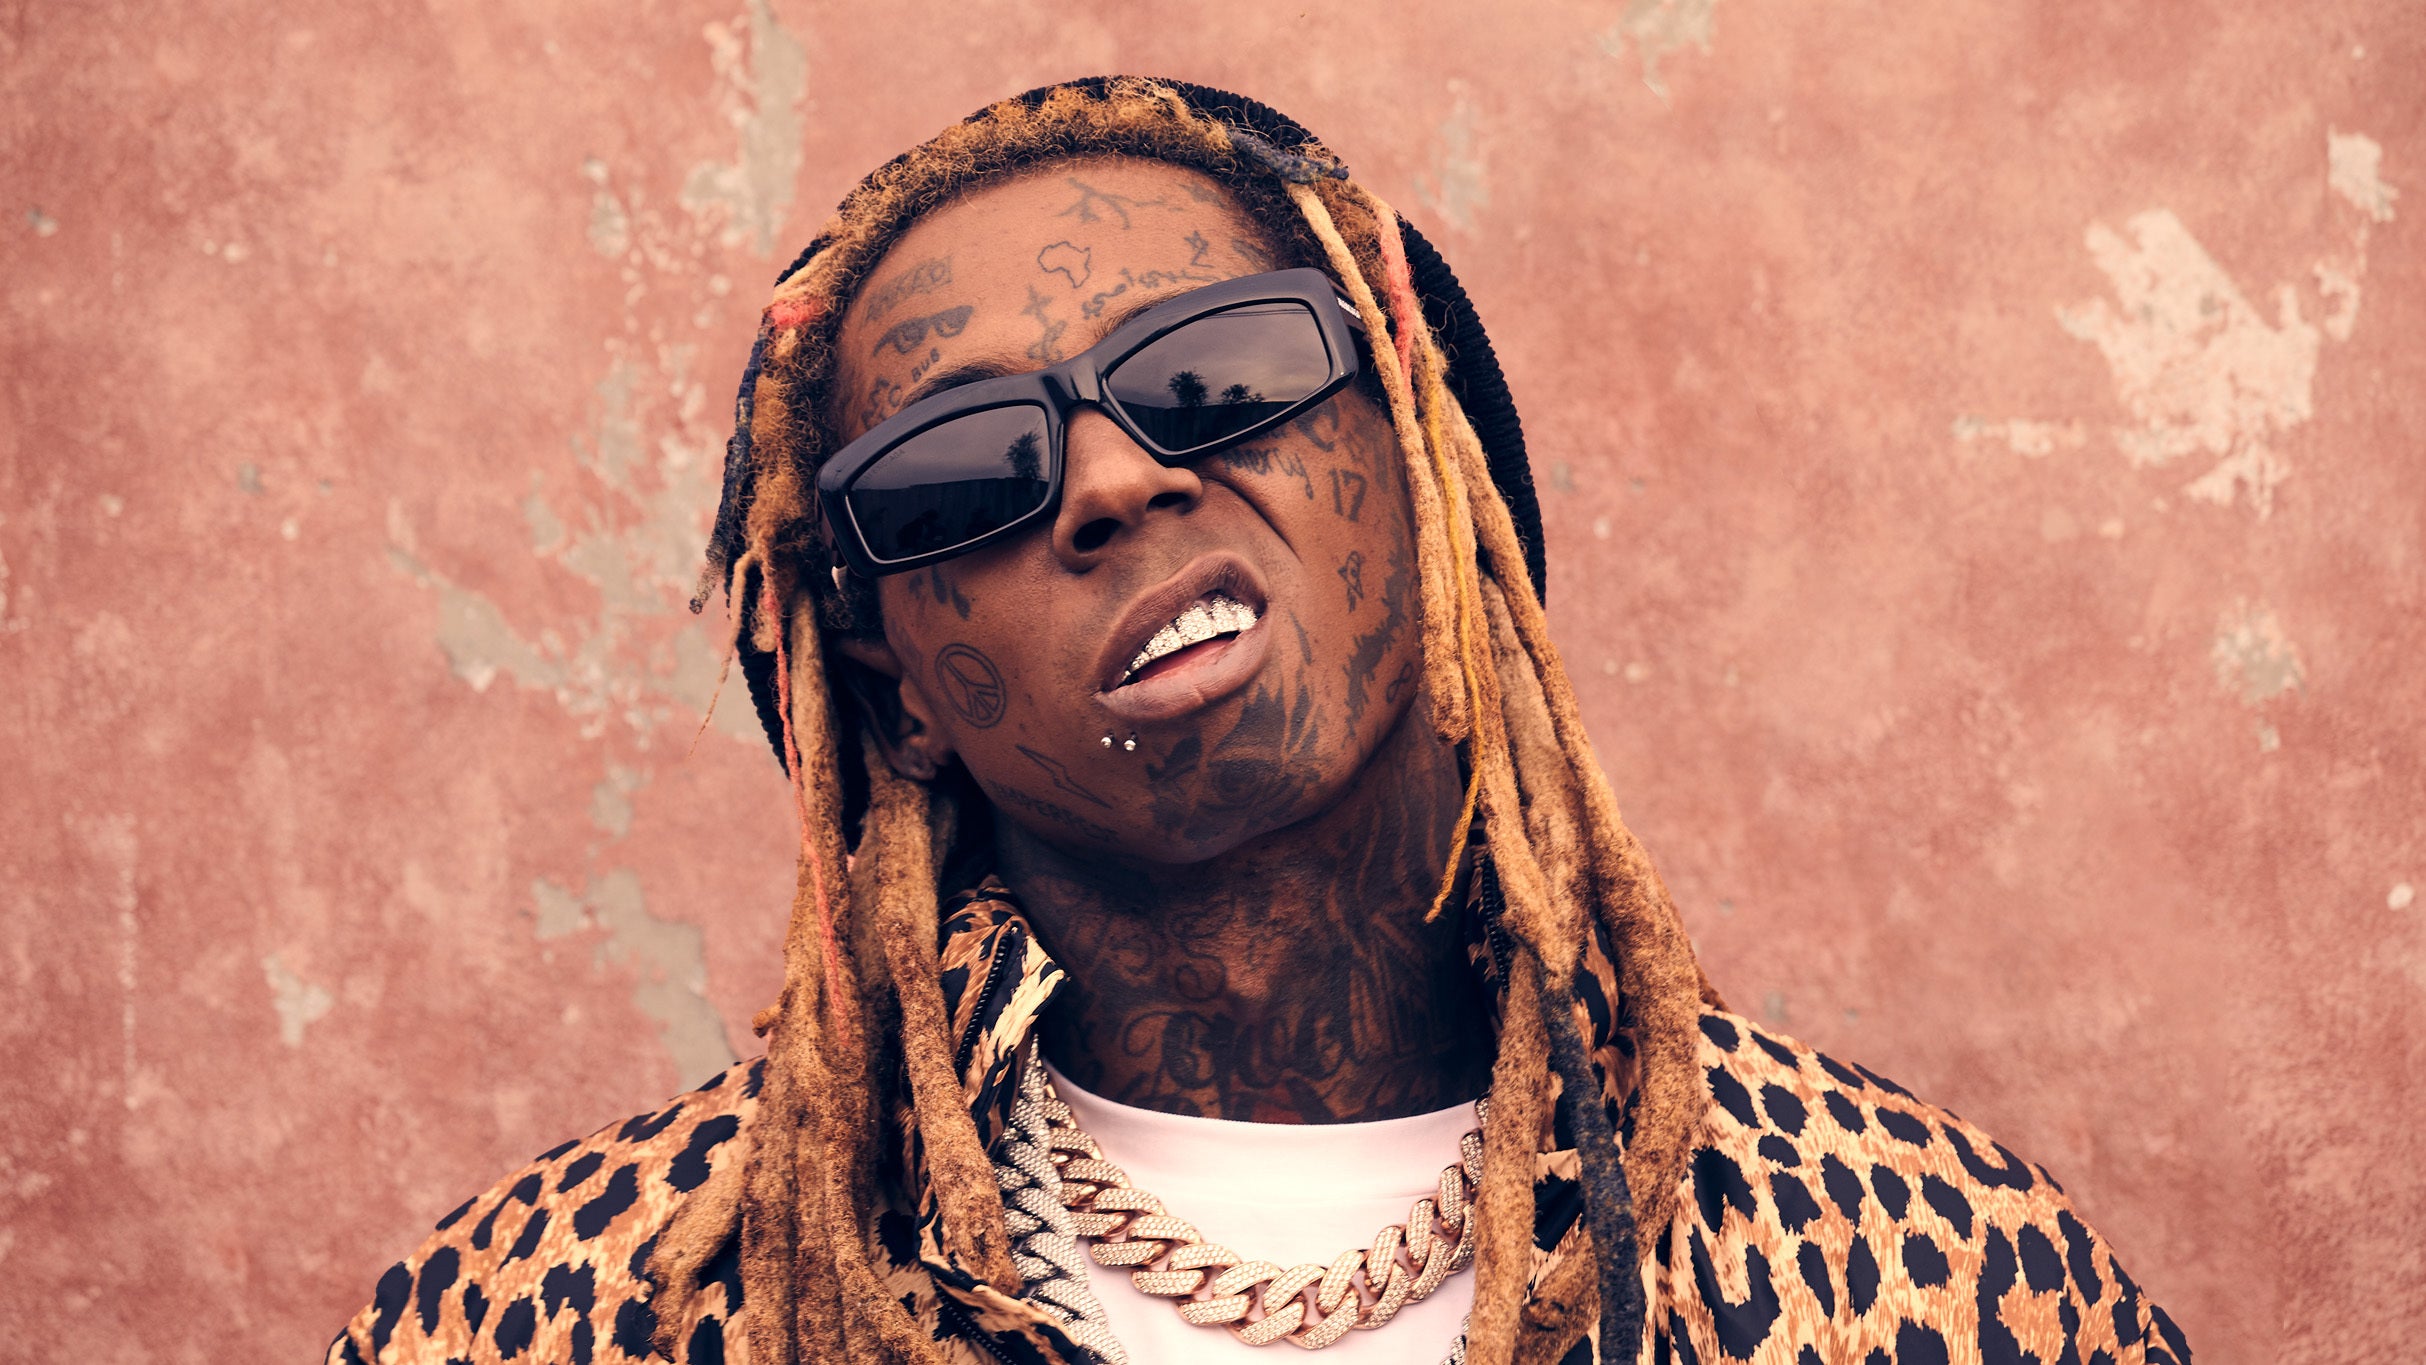 Lil Wayne free presale code for concert tickets in Columbia, SC (Township Auditorium)